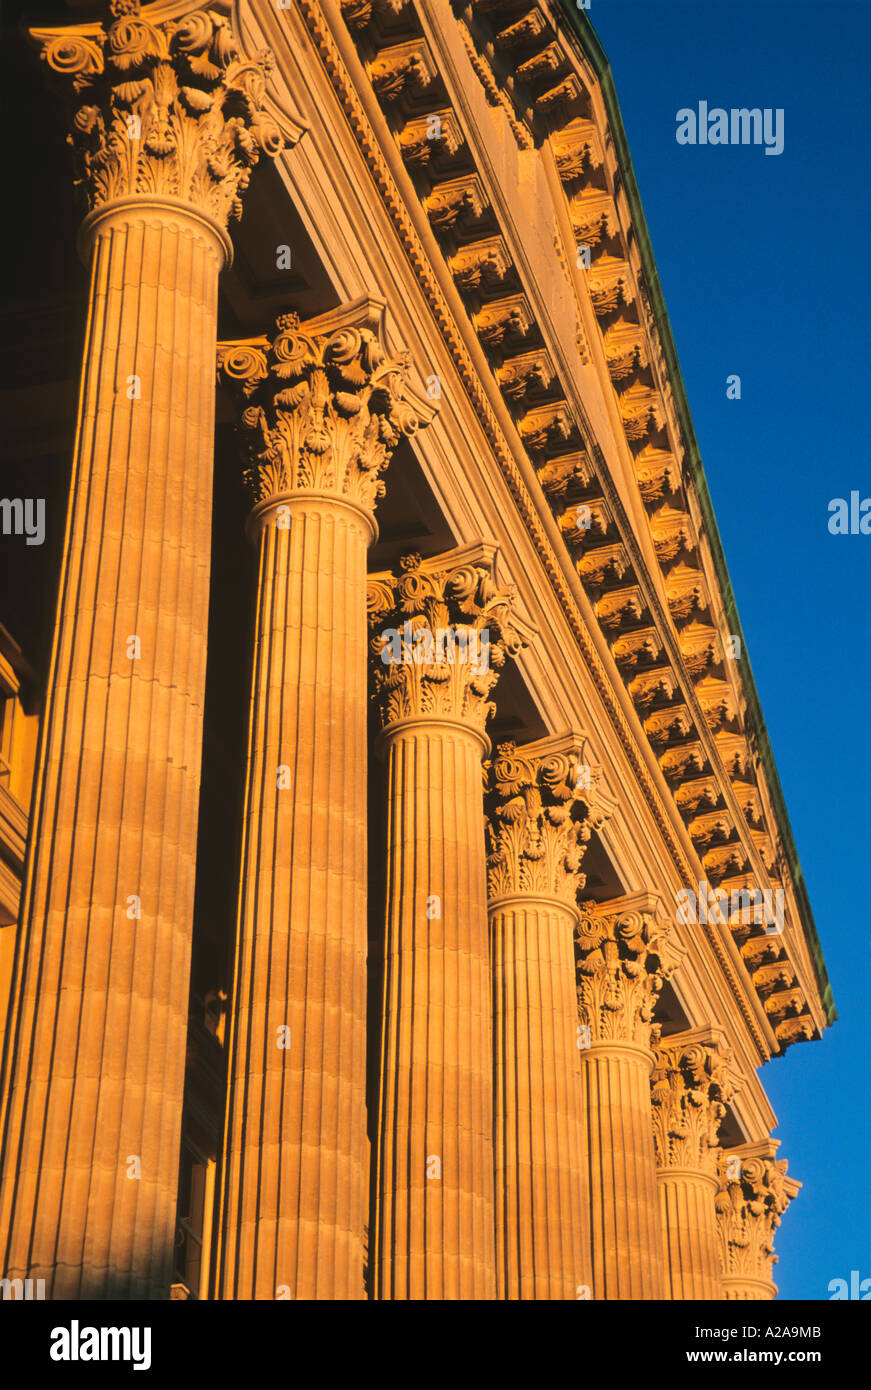 Columns of the State Capitol building in Topeka, Kansas. Stock Photo